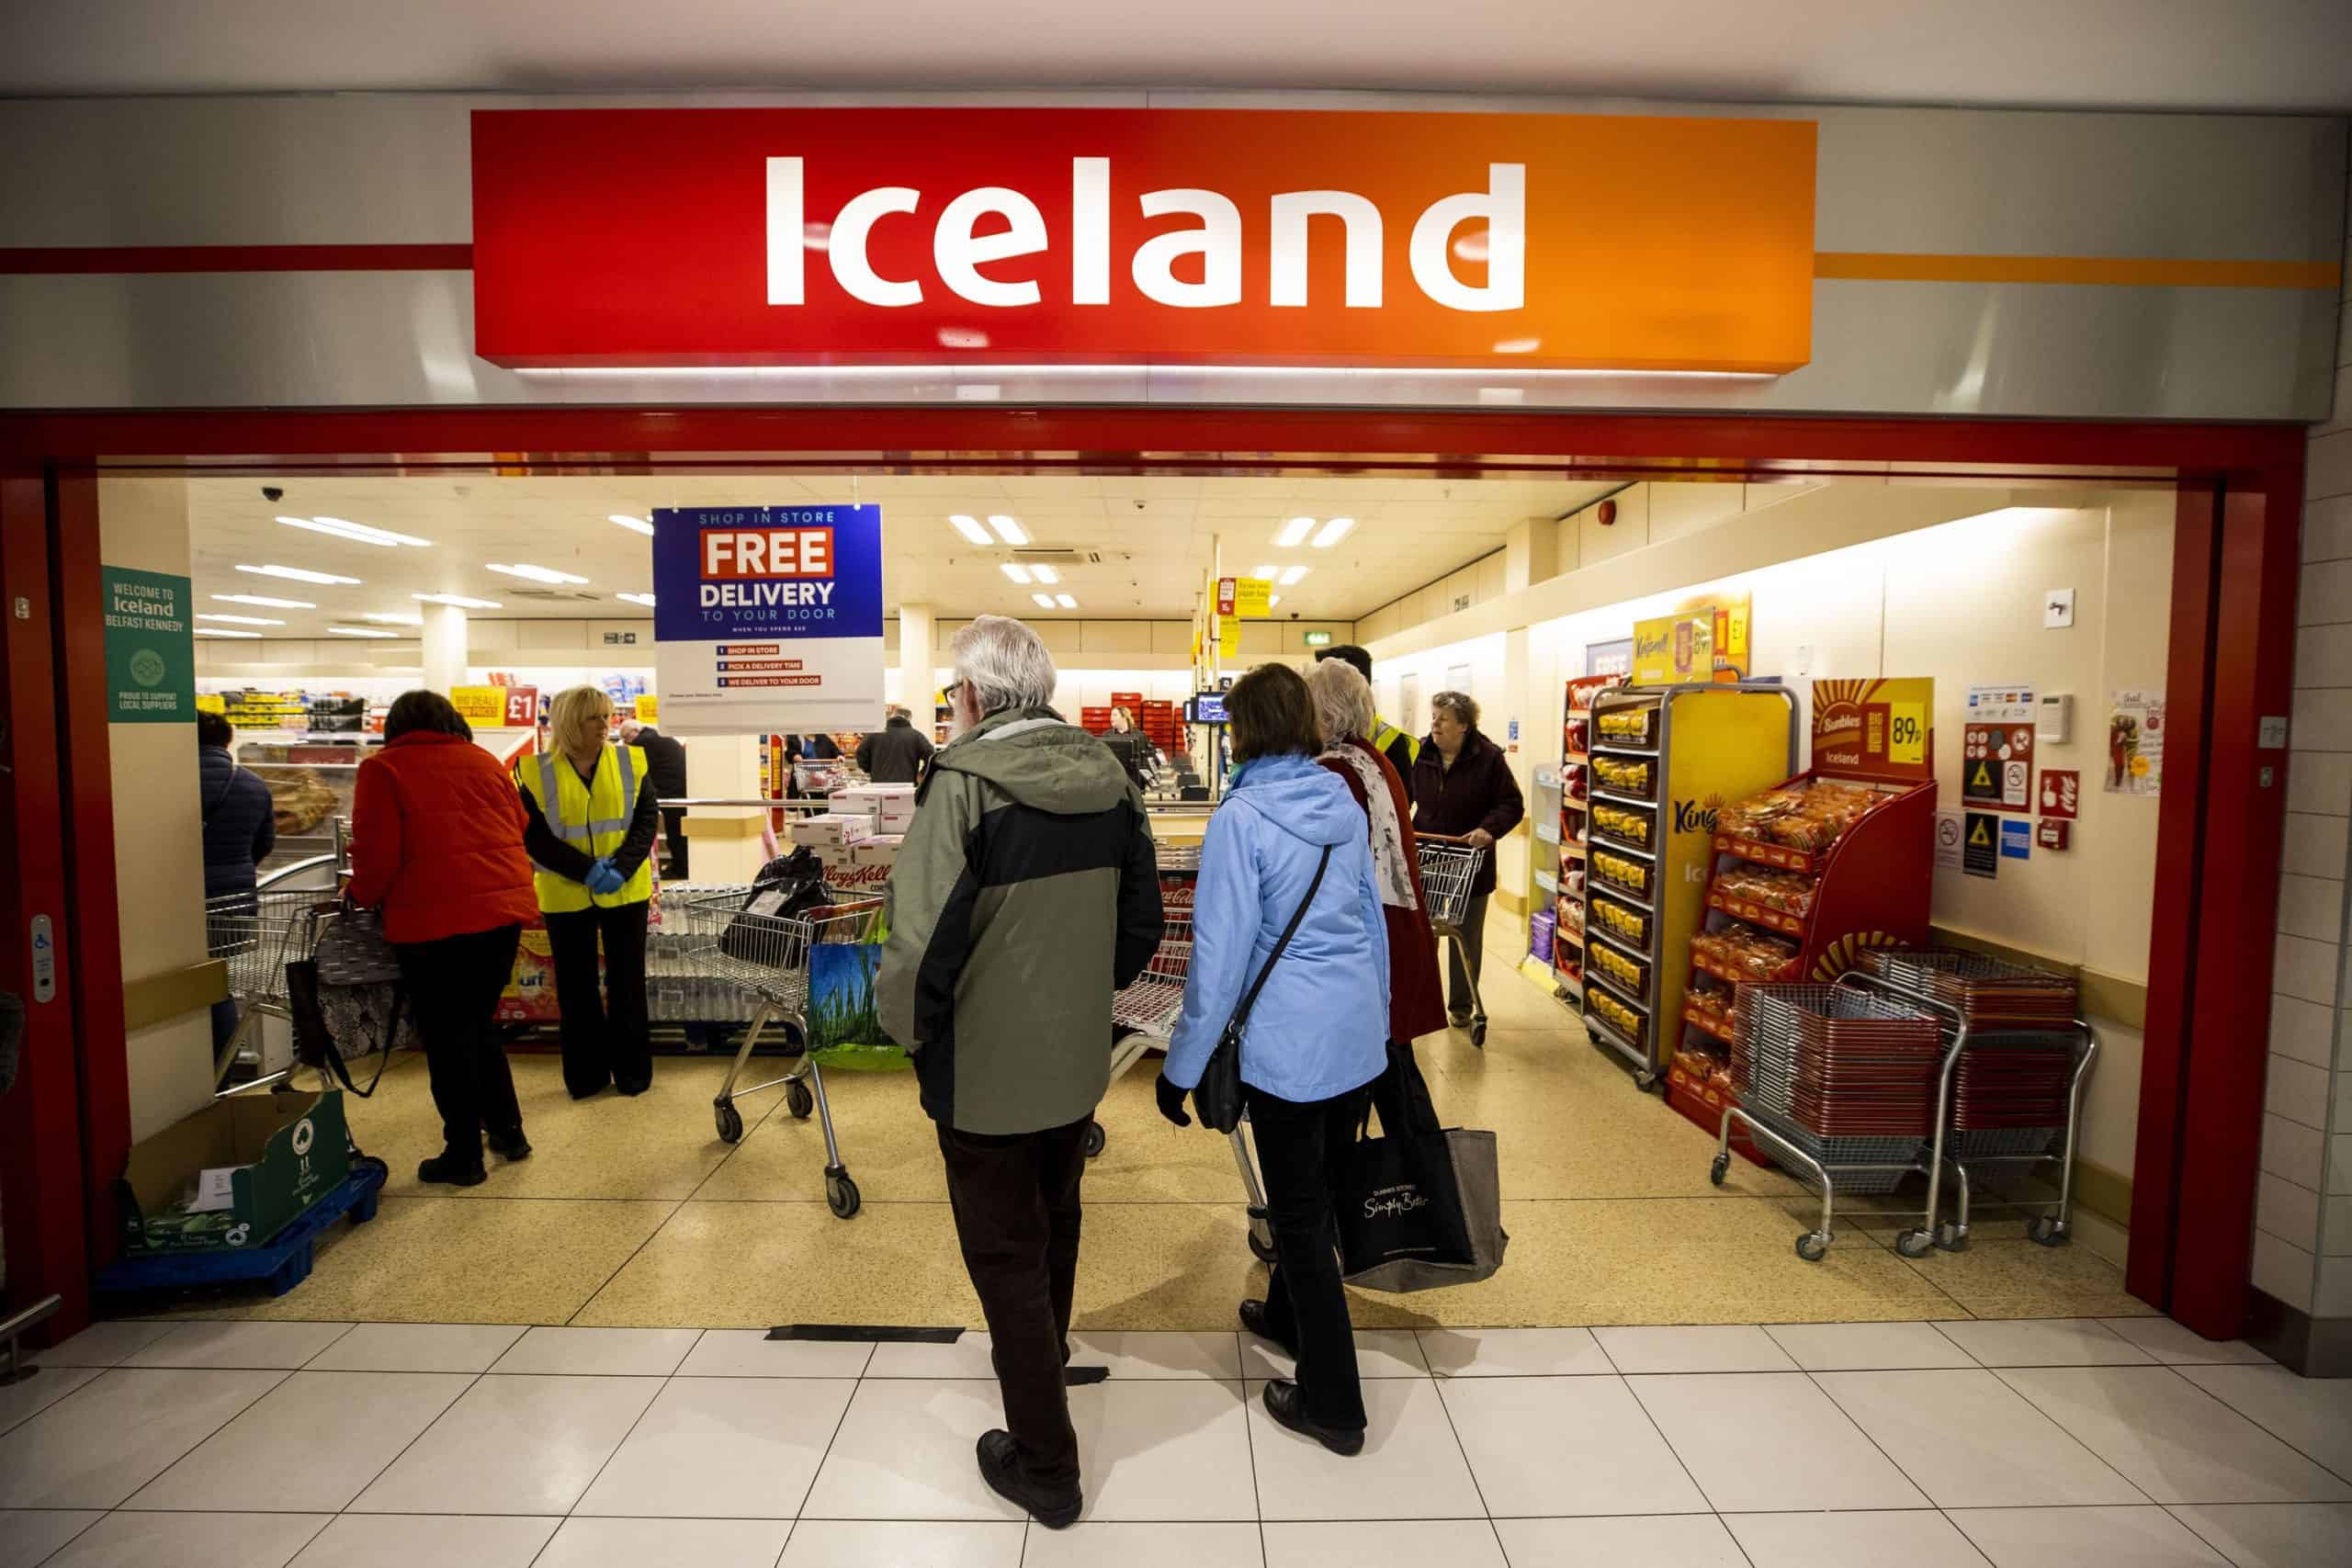 Two Iceland delivery vans destroyed in ‘sickening’ attack